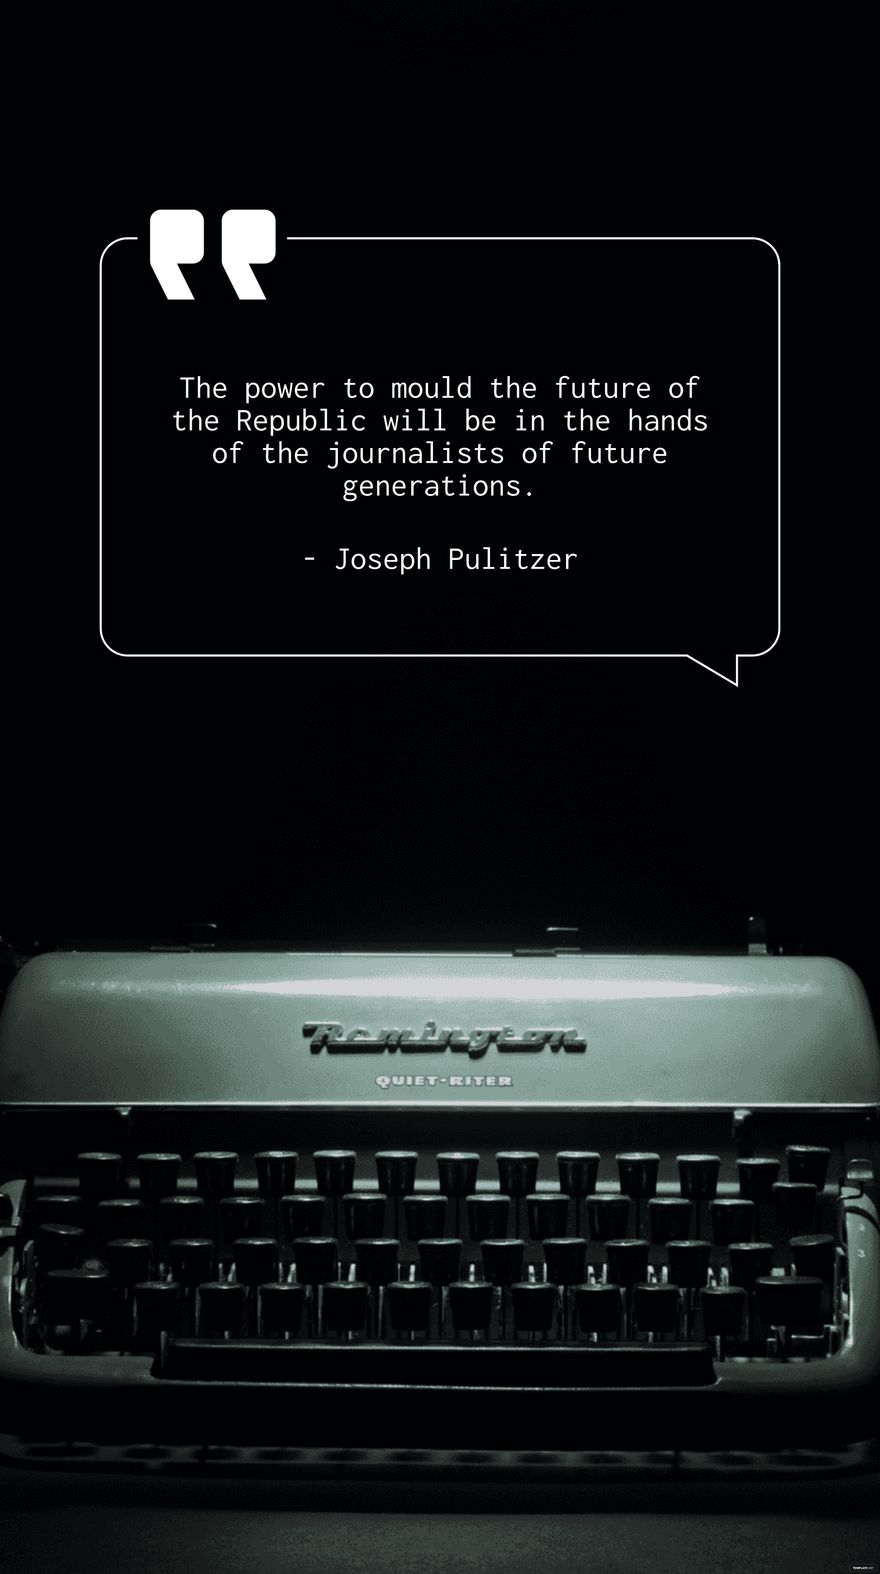 The power to mould the future of the Republic will be in the hands of the journalists of future generations. - Joseph Pulitzer